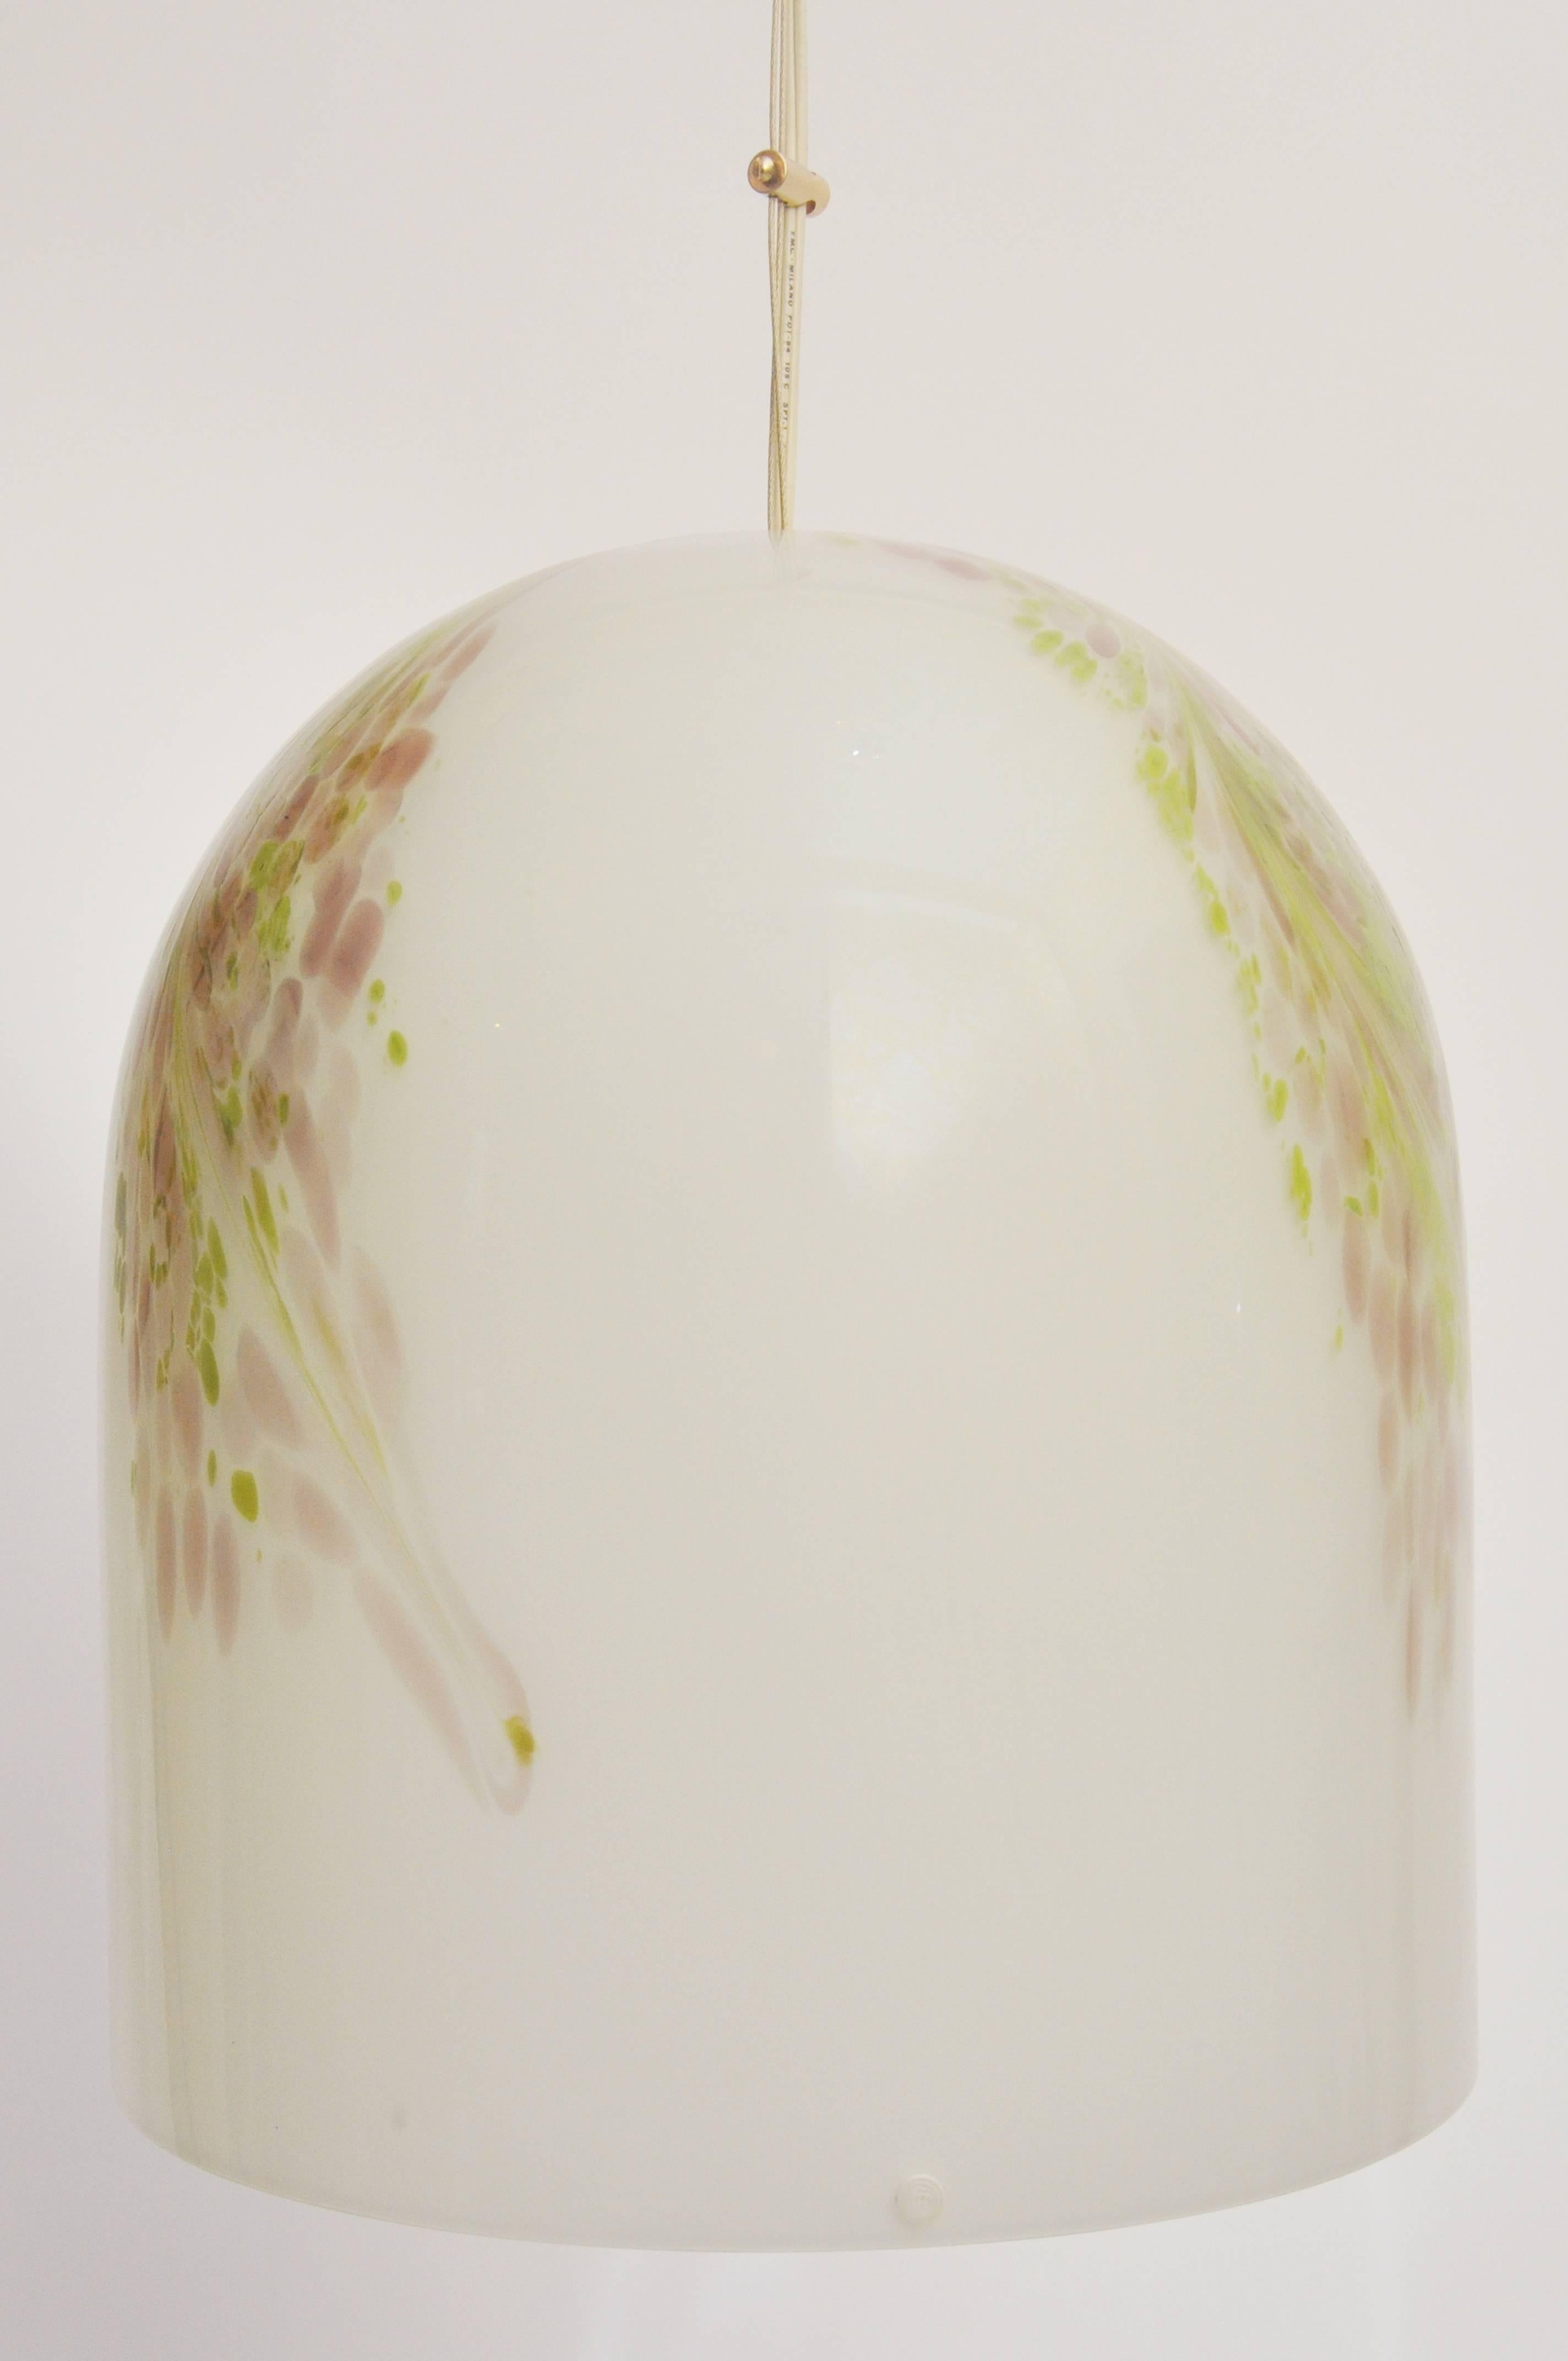 Bell shaped Murano glass shade. White with pale purple and green design. Hangs on a very long wire that is adjustable. The wire is 36" long. The glass globe is 14" height and 14" diameter. Fixture has original bright brass canopy.